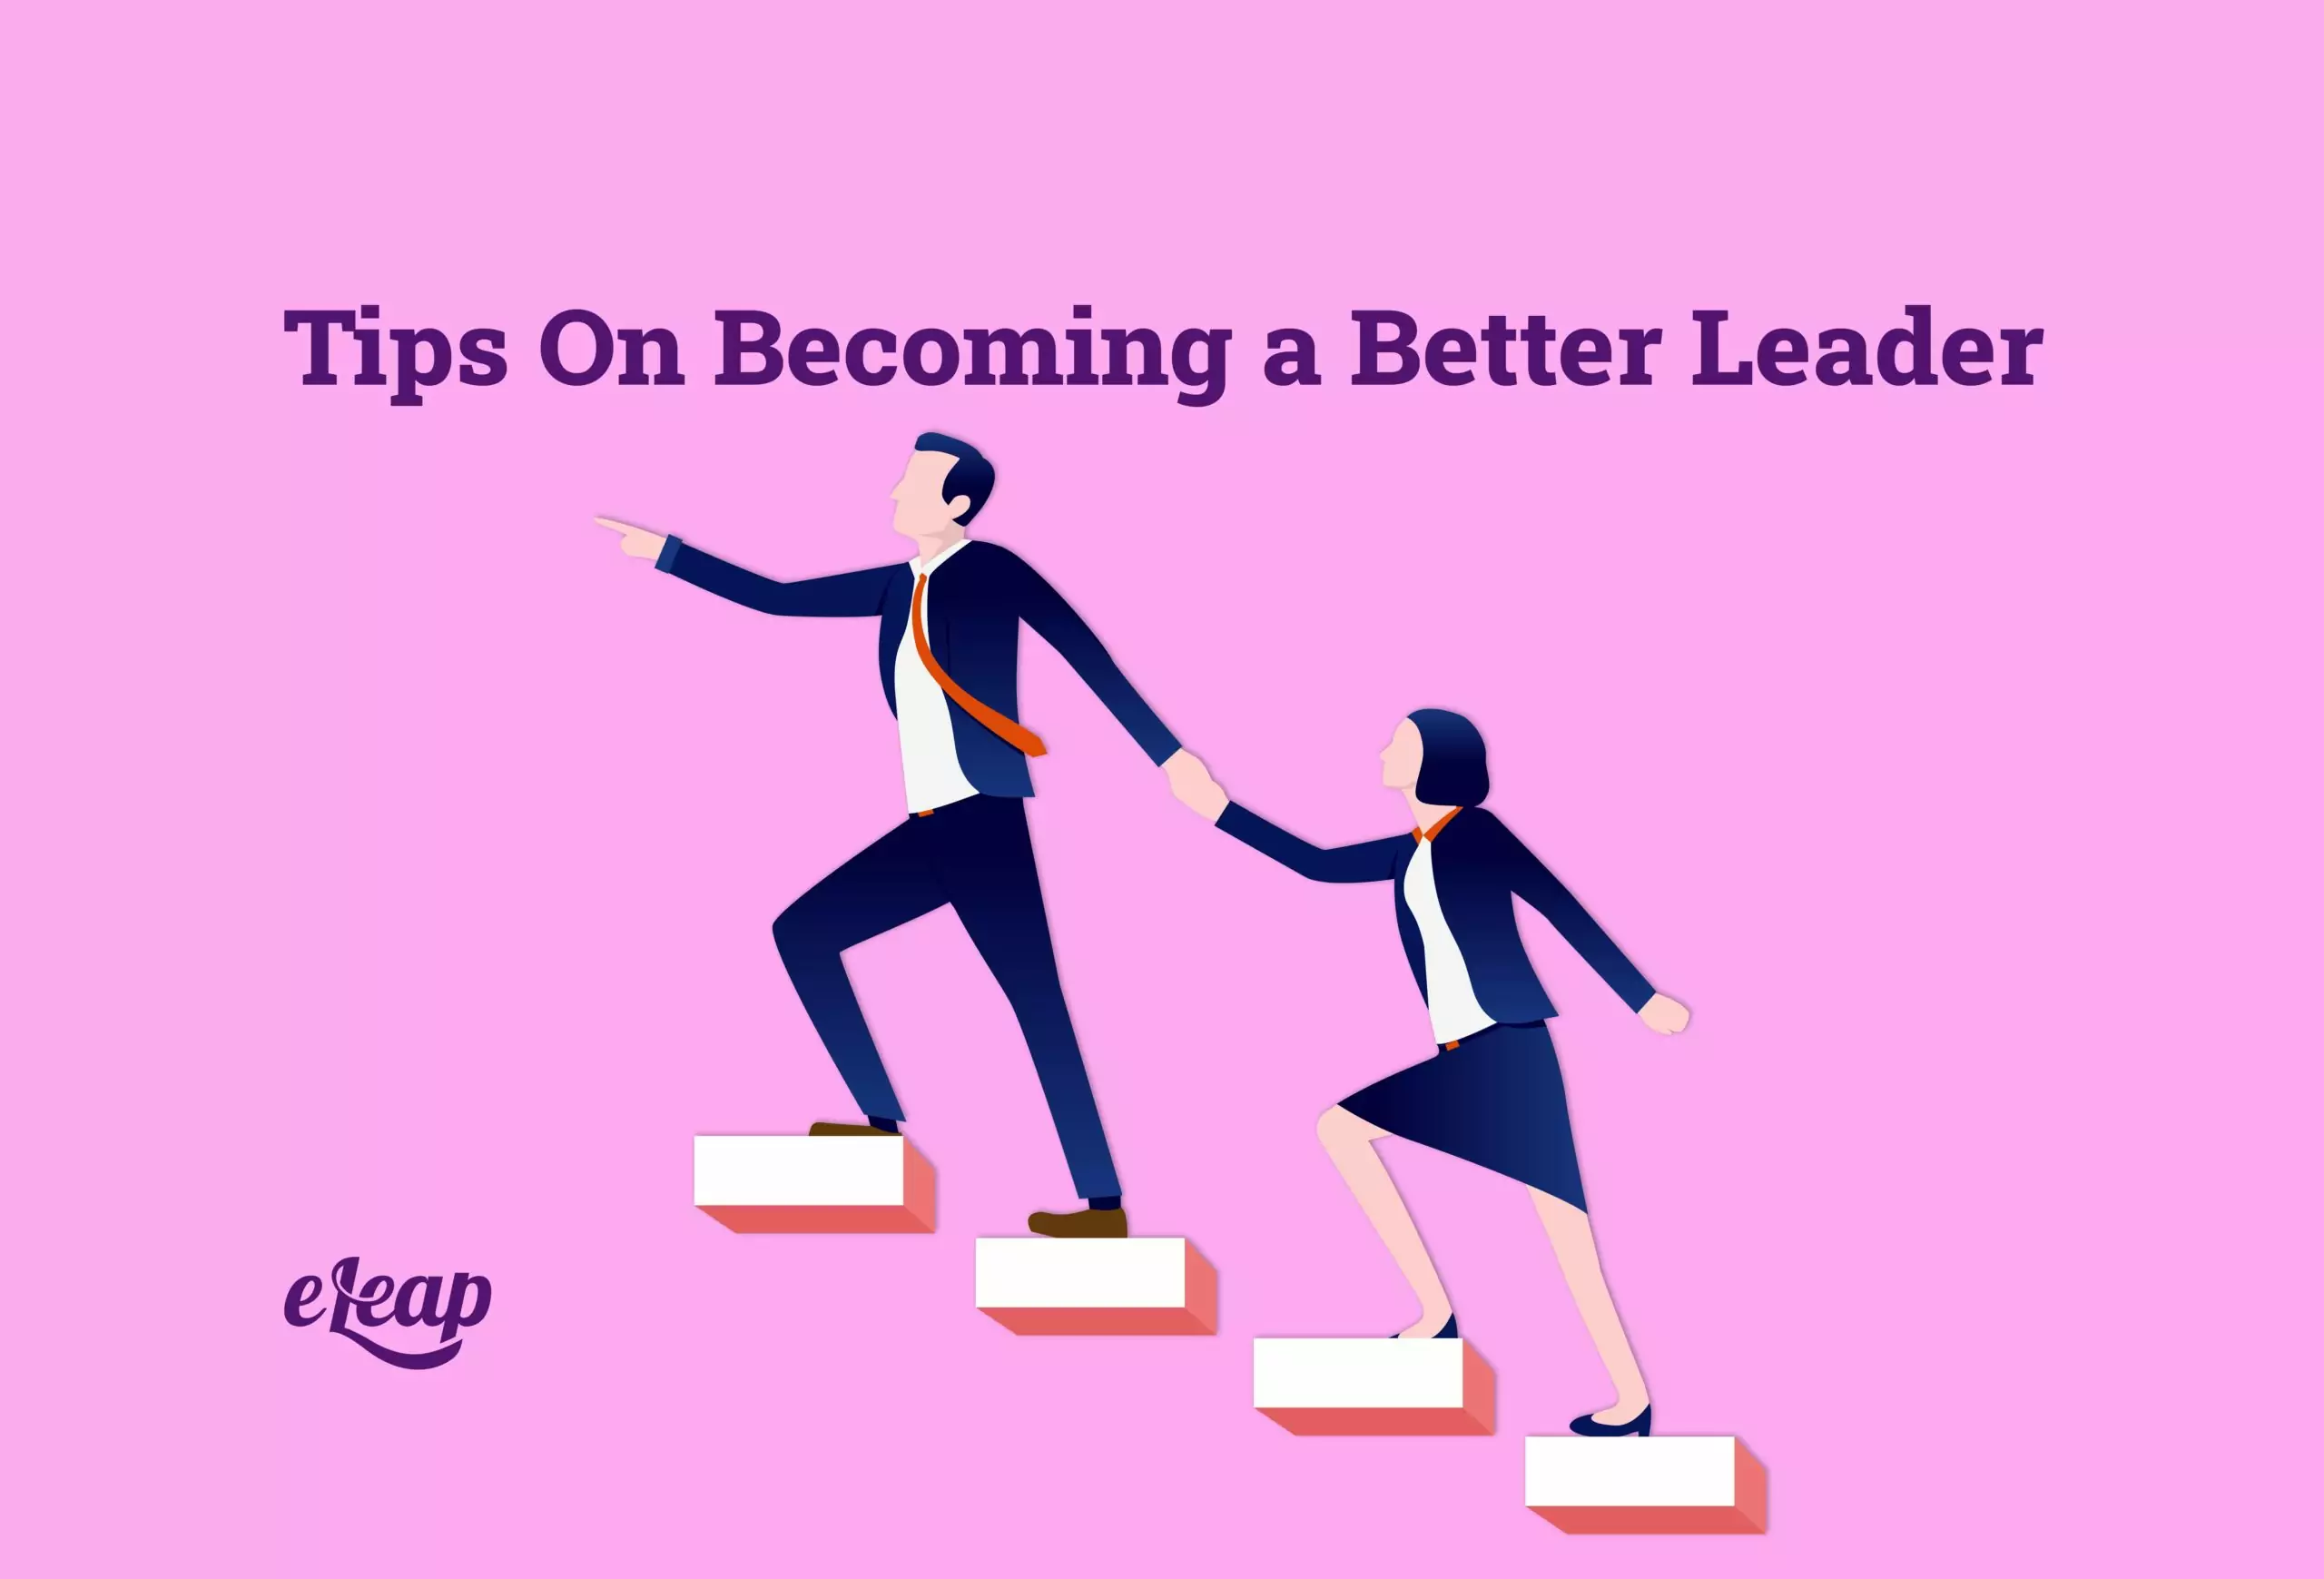 Tips On Becoming a Better Leader